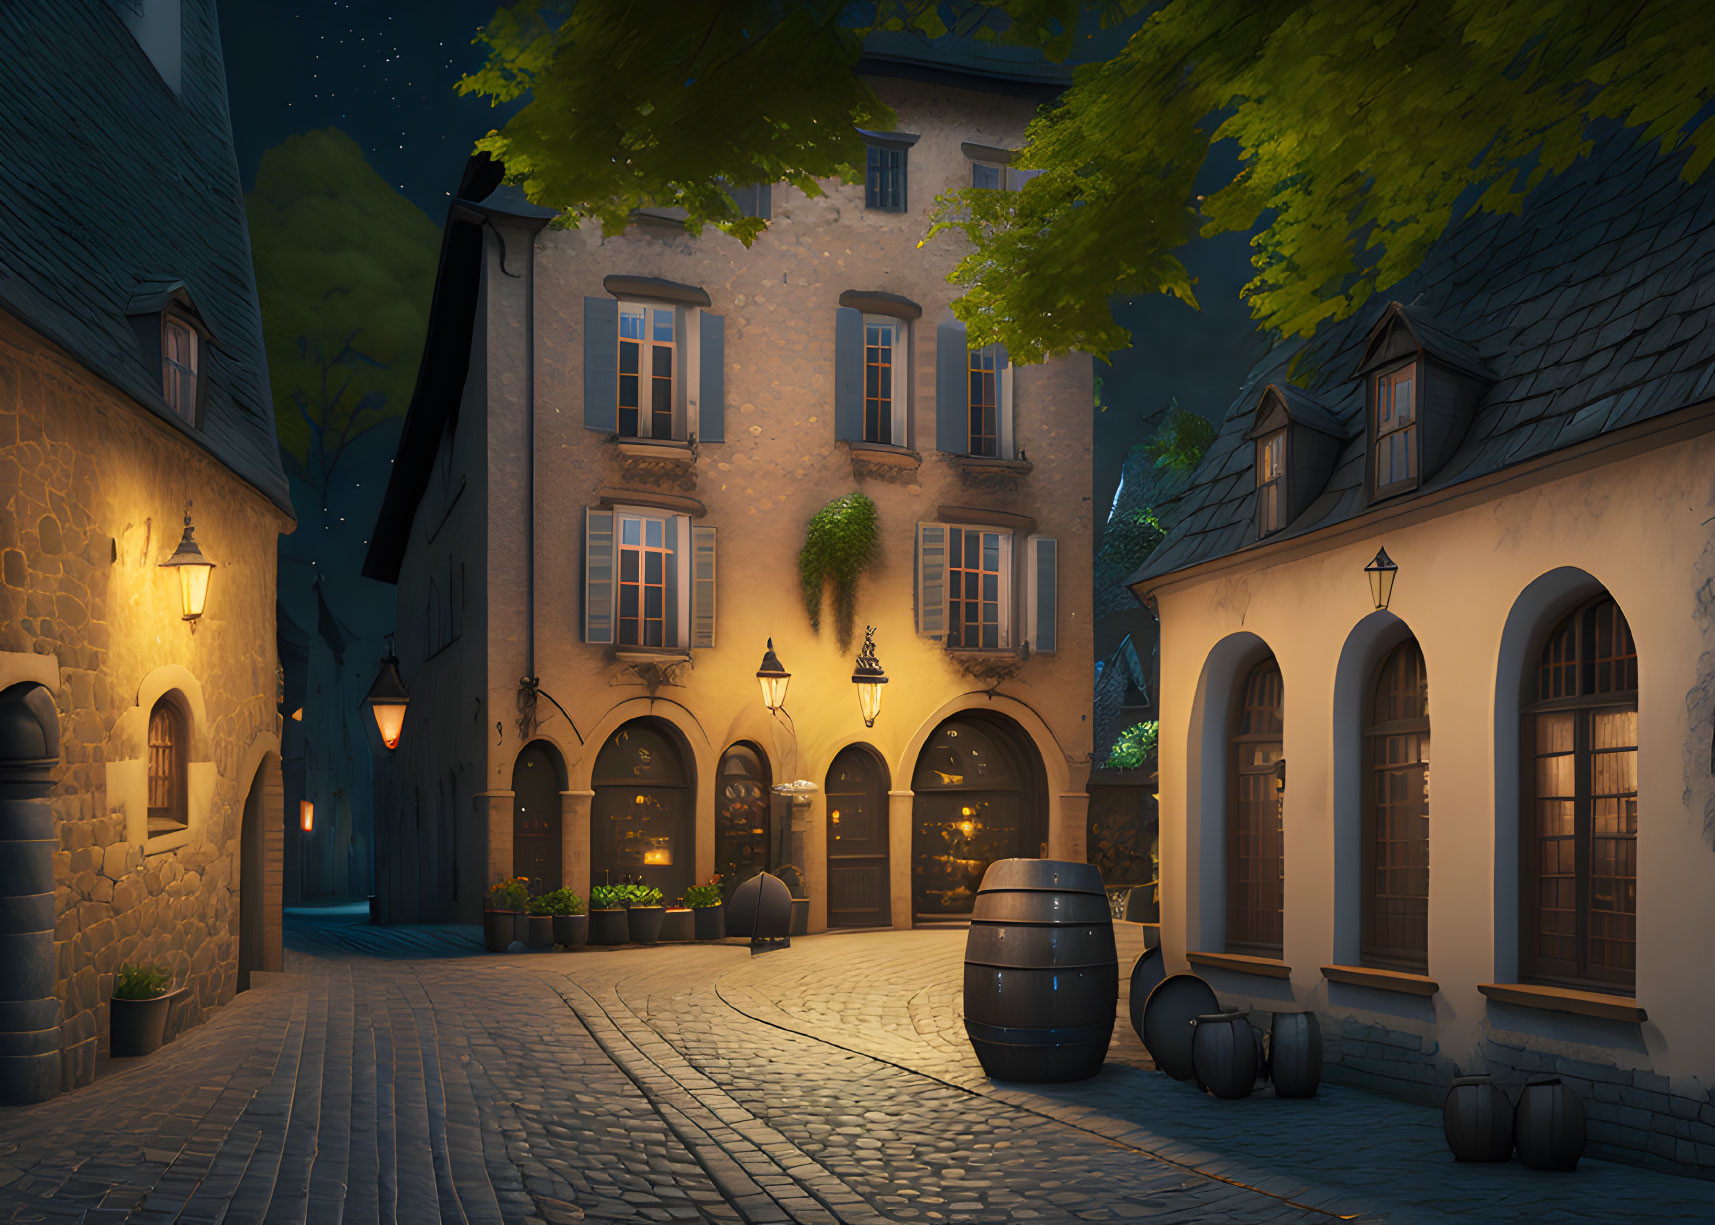 Traditional European cobblestone street at night with warm street lamps and quaint buildings.